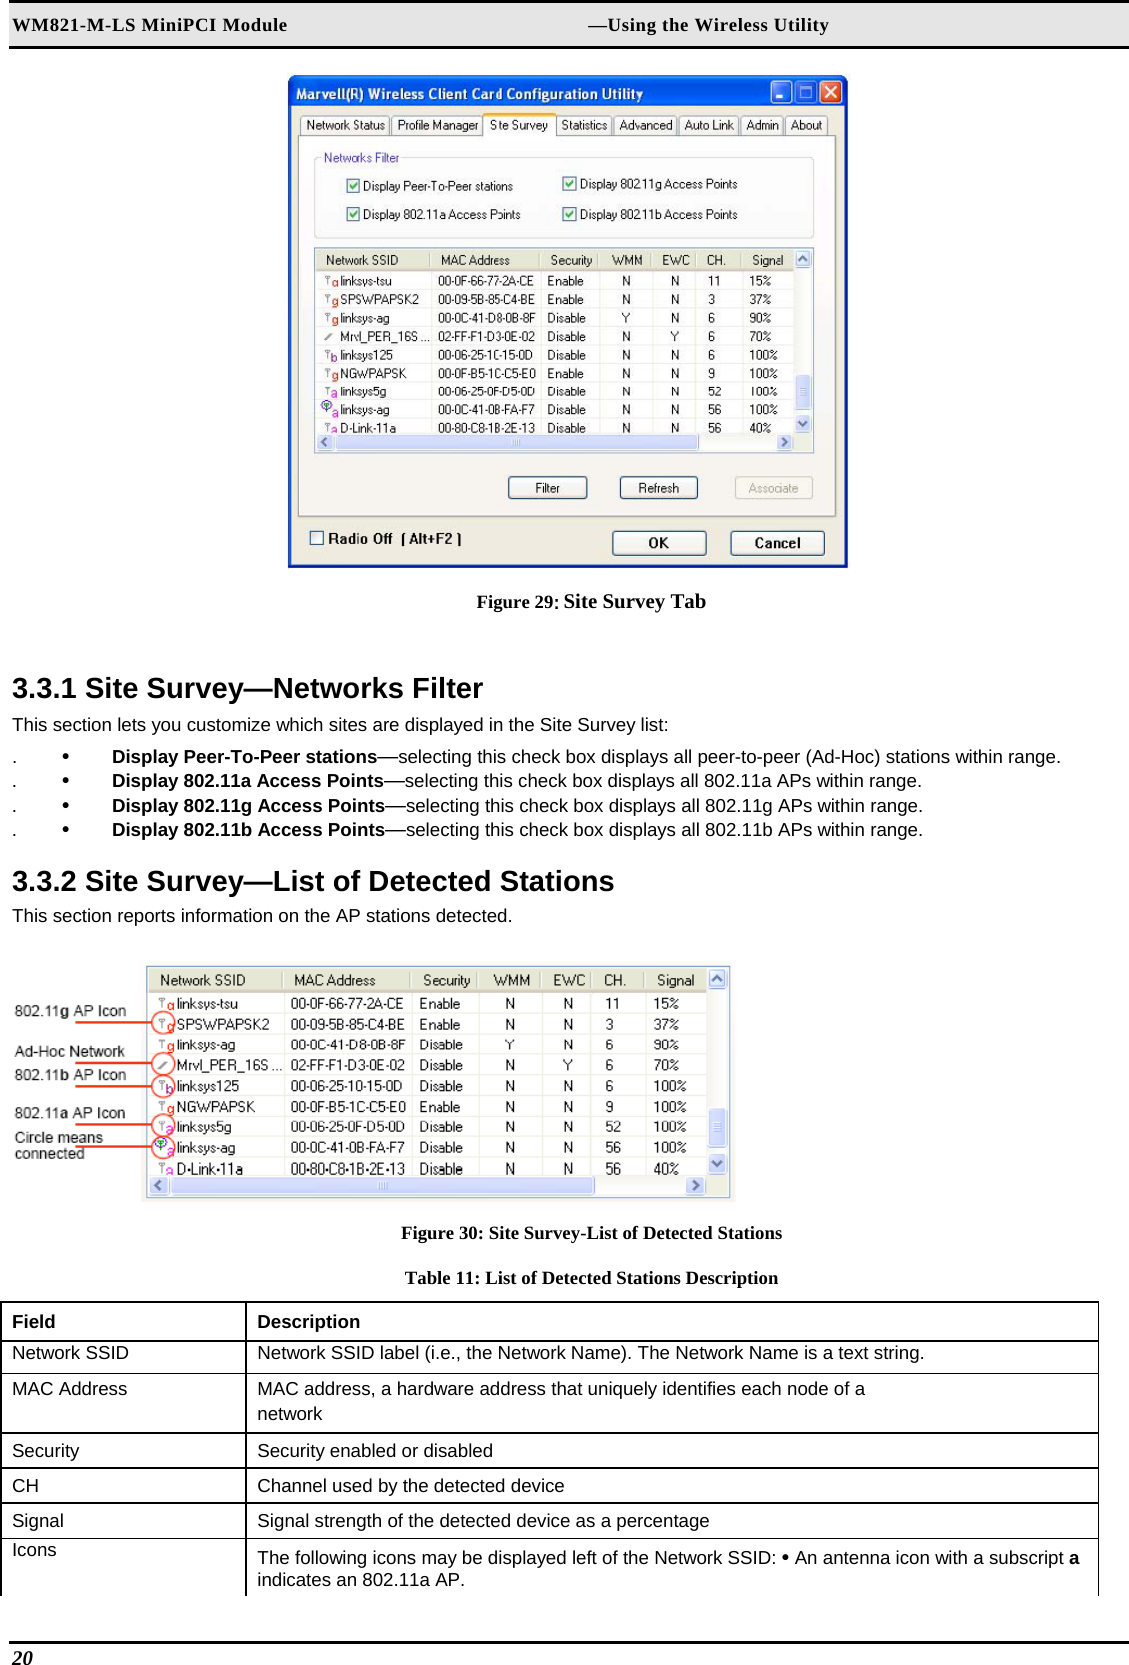 WM821-M-LS MiniPCI Module                                                        —Using the Wireless Utility 20    Figure 29: Site Survey Tab  3.3.1 Site Survey—Networks Filter  This section lets you customize which sites are displayed in the Site Survey list:  .  •  Display Peer-To-Peer stations—selecting this check box displays all peer-to-peer (Ad-Hoc) stations within range.  .  •  Display 802.11a Access Points—selecting this check box displays all 802.11a APs within range.  .  •  Display 802.11g Access Points—selecting this check box displays all 802.11g APs within range.  .  •  Display 802.11b Access Points—selecting this check box displays all 802.11b APs within range.   3.3.2 Site Survey—List of Detected Stations  This section reports information on the AP stations detected.   Figure 30: Site Survey-List of Detected Stations Table 11: List of Detected Stations Description Field  Description  Network SSID   Network SSID label (i.e., the Network Name). The Network Name is a text string.  MAC Address   MAC address, a hardware address that uniquely identifies each node of a   network  Security   Security enabled or disabled  CH   Channel used by the detected device  Signal   Signal strength of the detected device as a percentage  Icons   The following icons may be displayed left of the Network SSID: • An antenna icon with a subscript a indicates an 802.11a AP.  